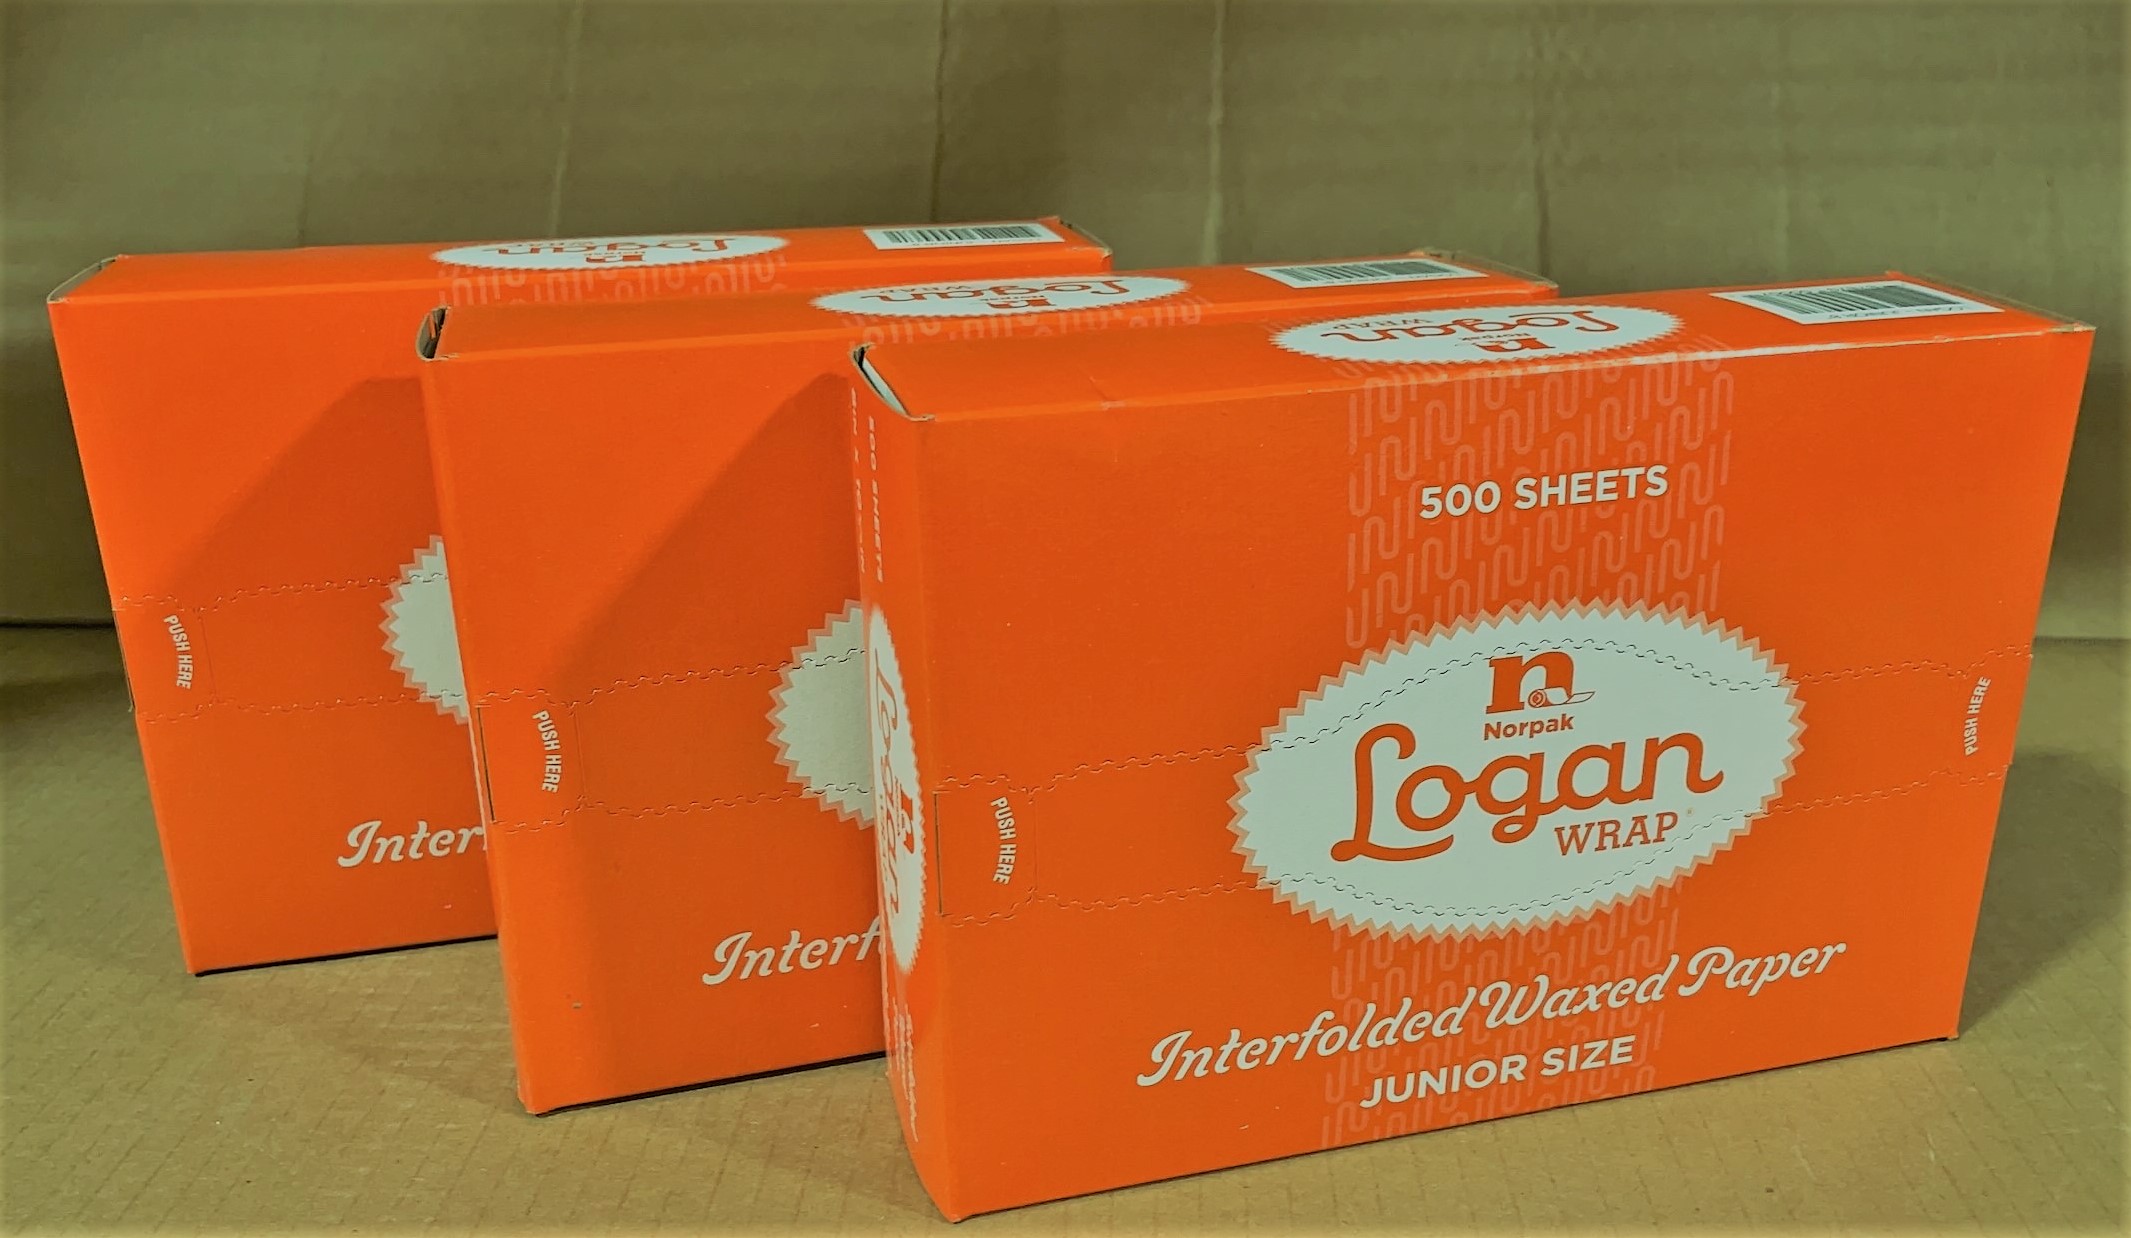 Logan - Interfolded Waxed Paper, Junior Size, 500 sheets